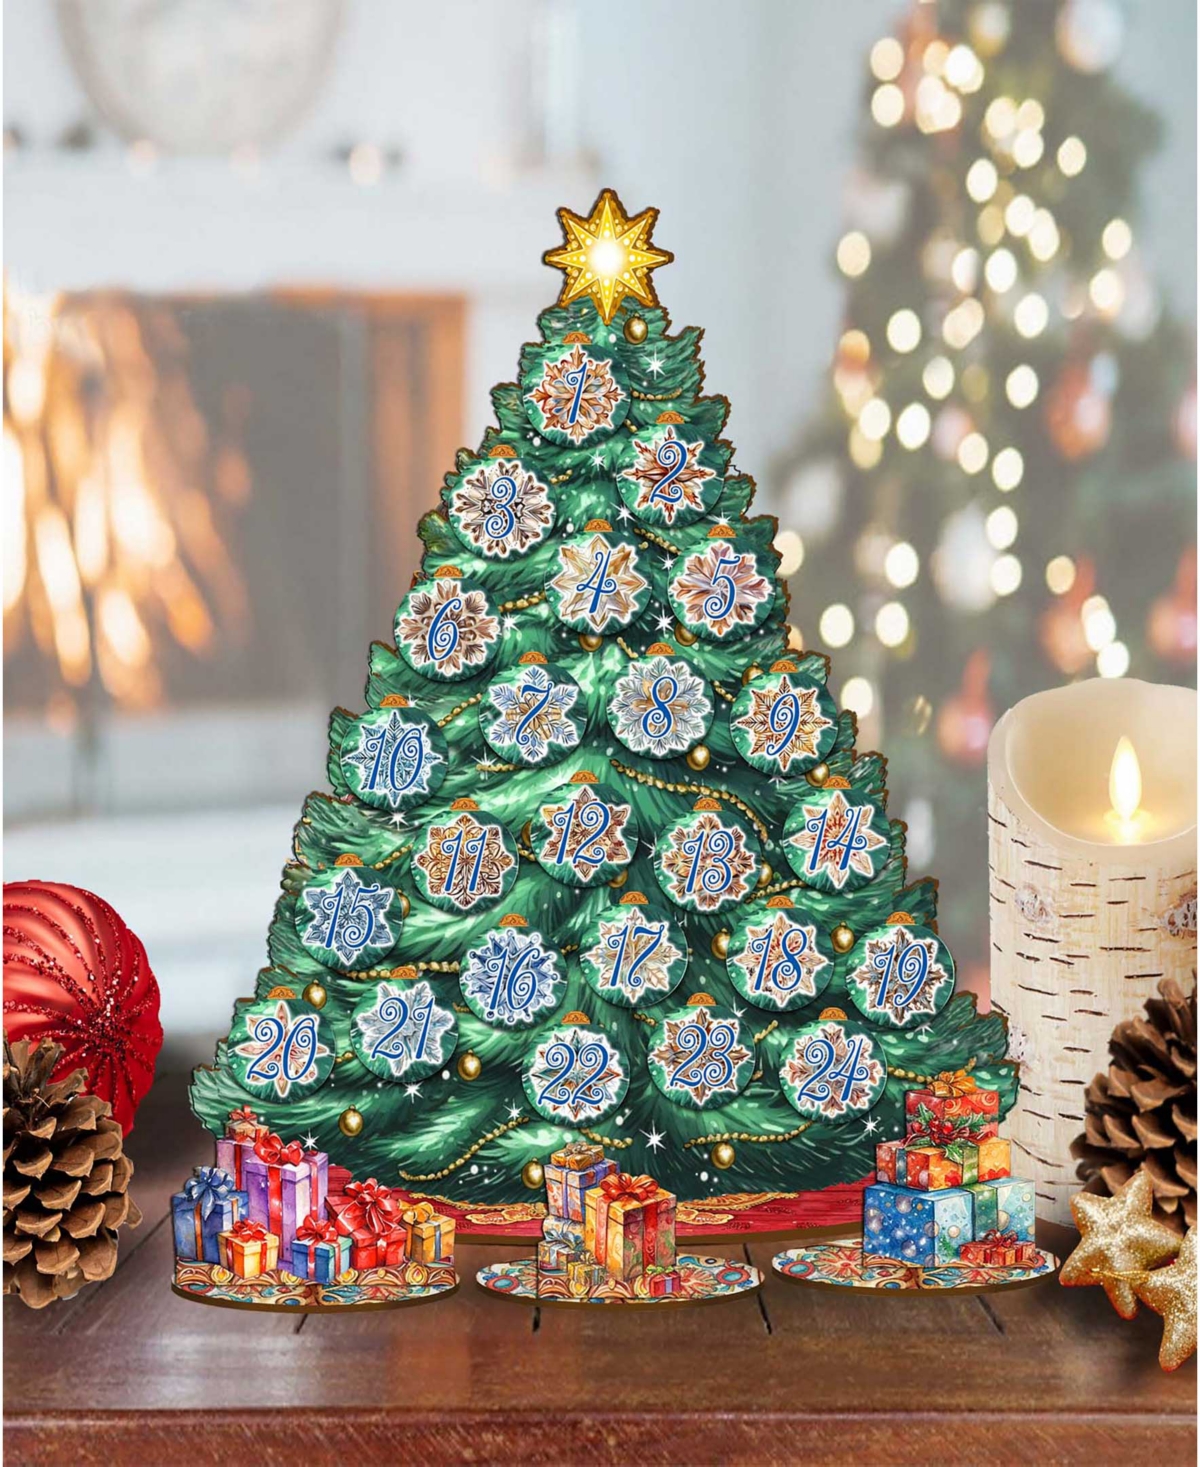 Shop Designocracy Advent Calendar Themed Wooden Christmas Tree With Ornaments Set Of 28 G. Debrekht In Multi Color